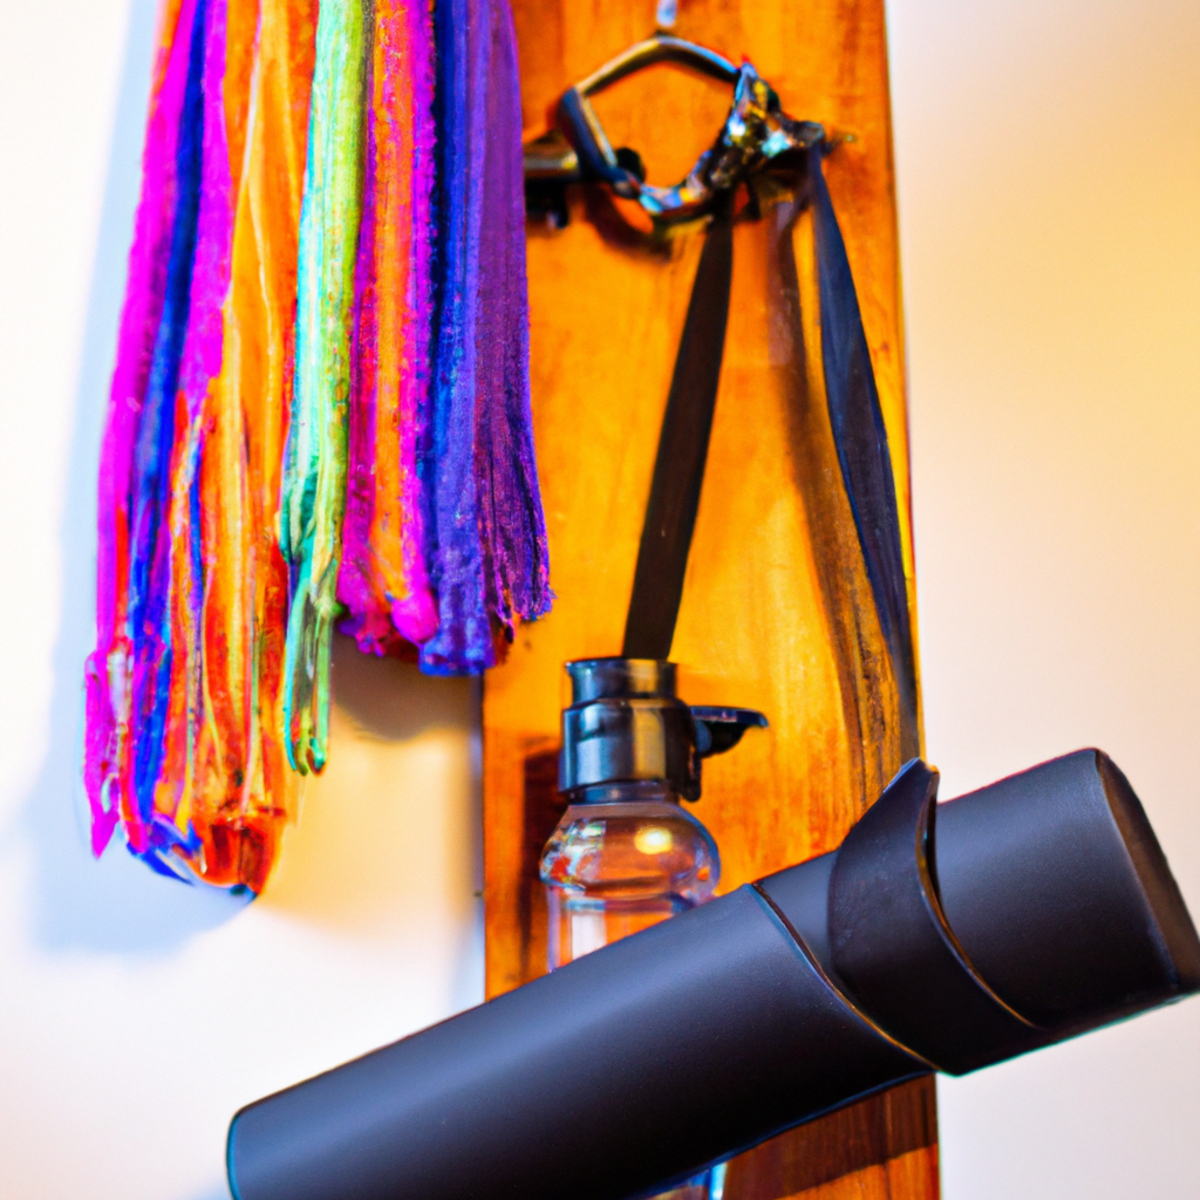 The photo features a sleek black yoga mat with a matching water bottle and towel neatly arranged on top. In the background, a set of colorful resistance bands hang from a hook on the wall. The lighting is bright and natural, casting a warm glow on the scene. The attention to detail in the composition of the objects suggests a sense of organization and dedication to fitness. It's a perfect representation of the article's message about the benefits of virtual fitness classes for staying motivated in your workouts.